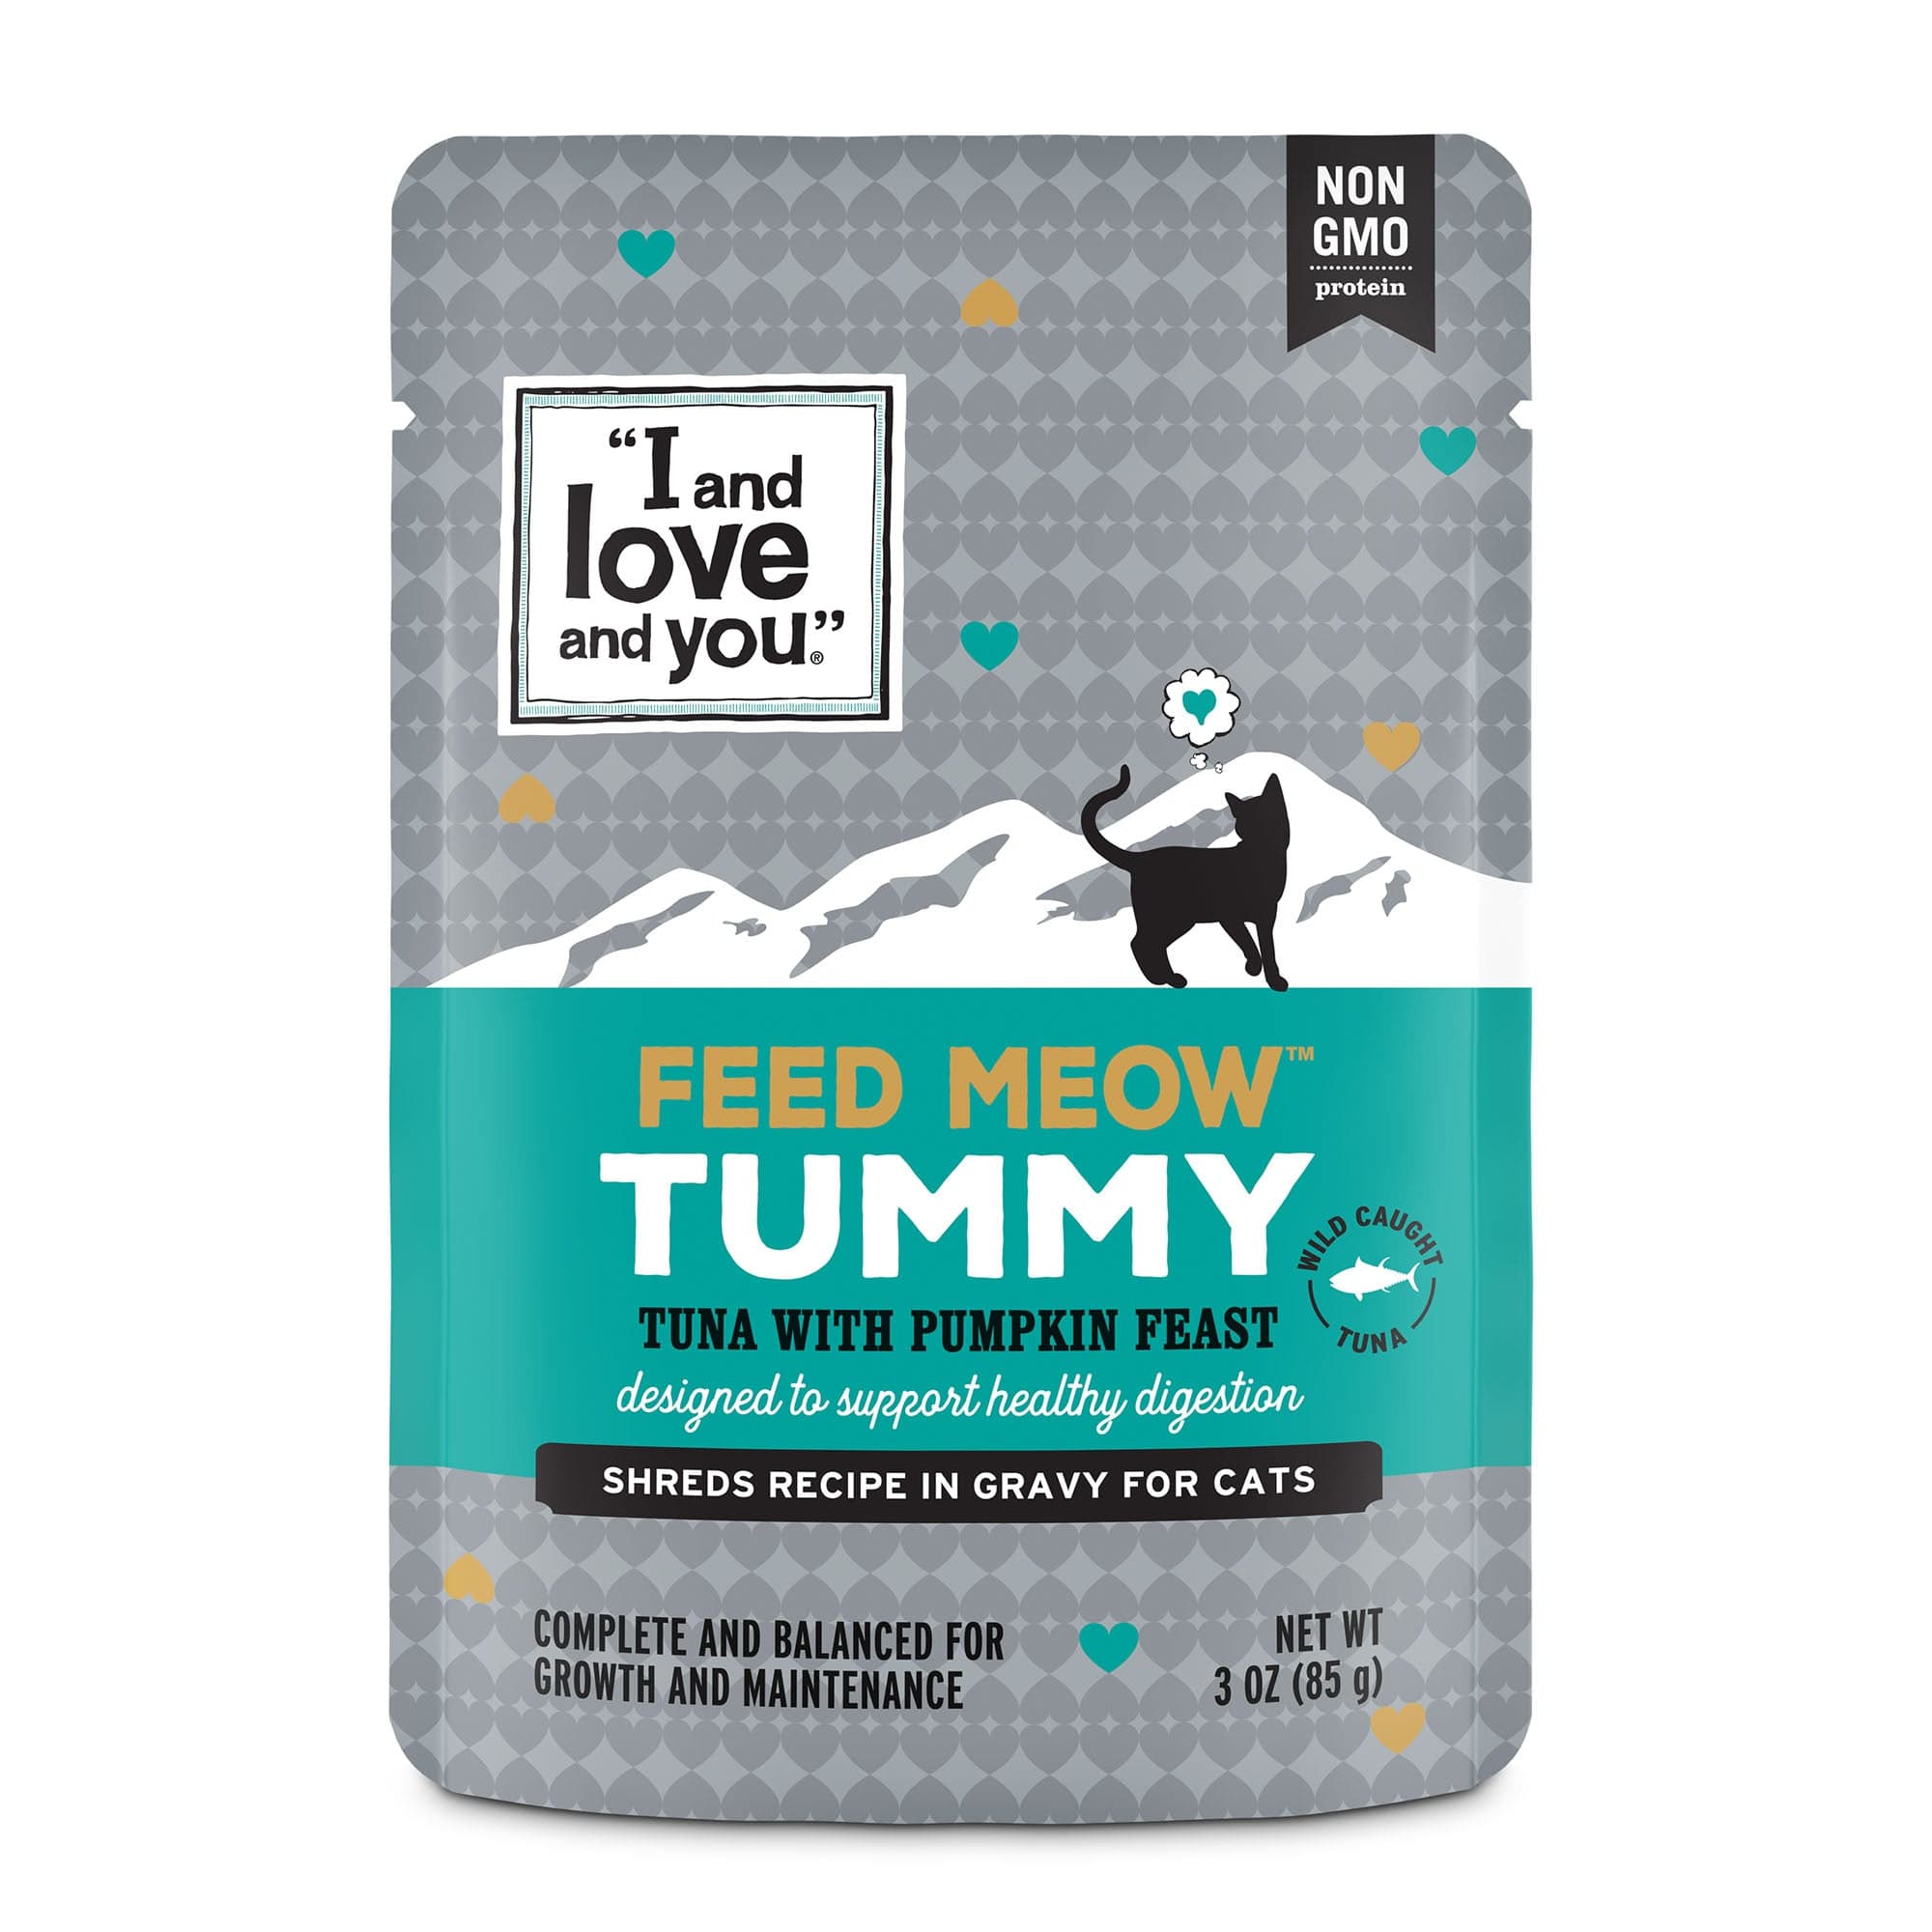 Feed Meow Tummy cat food package with a black cat and a label.